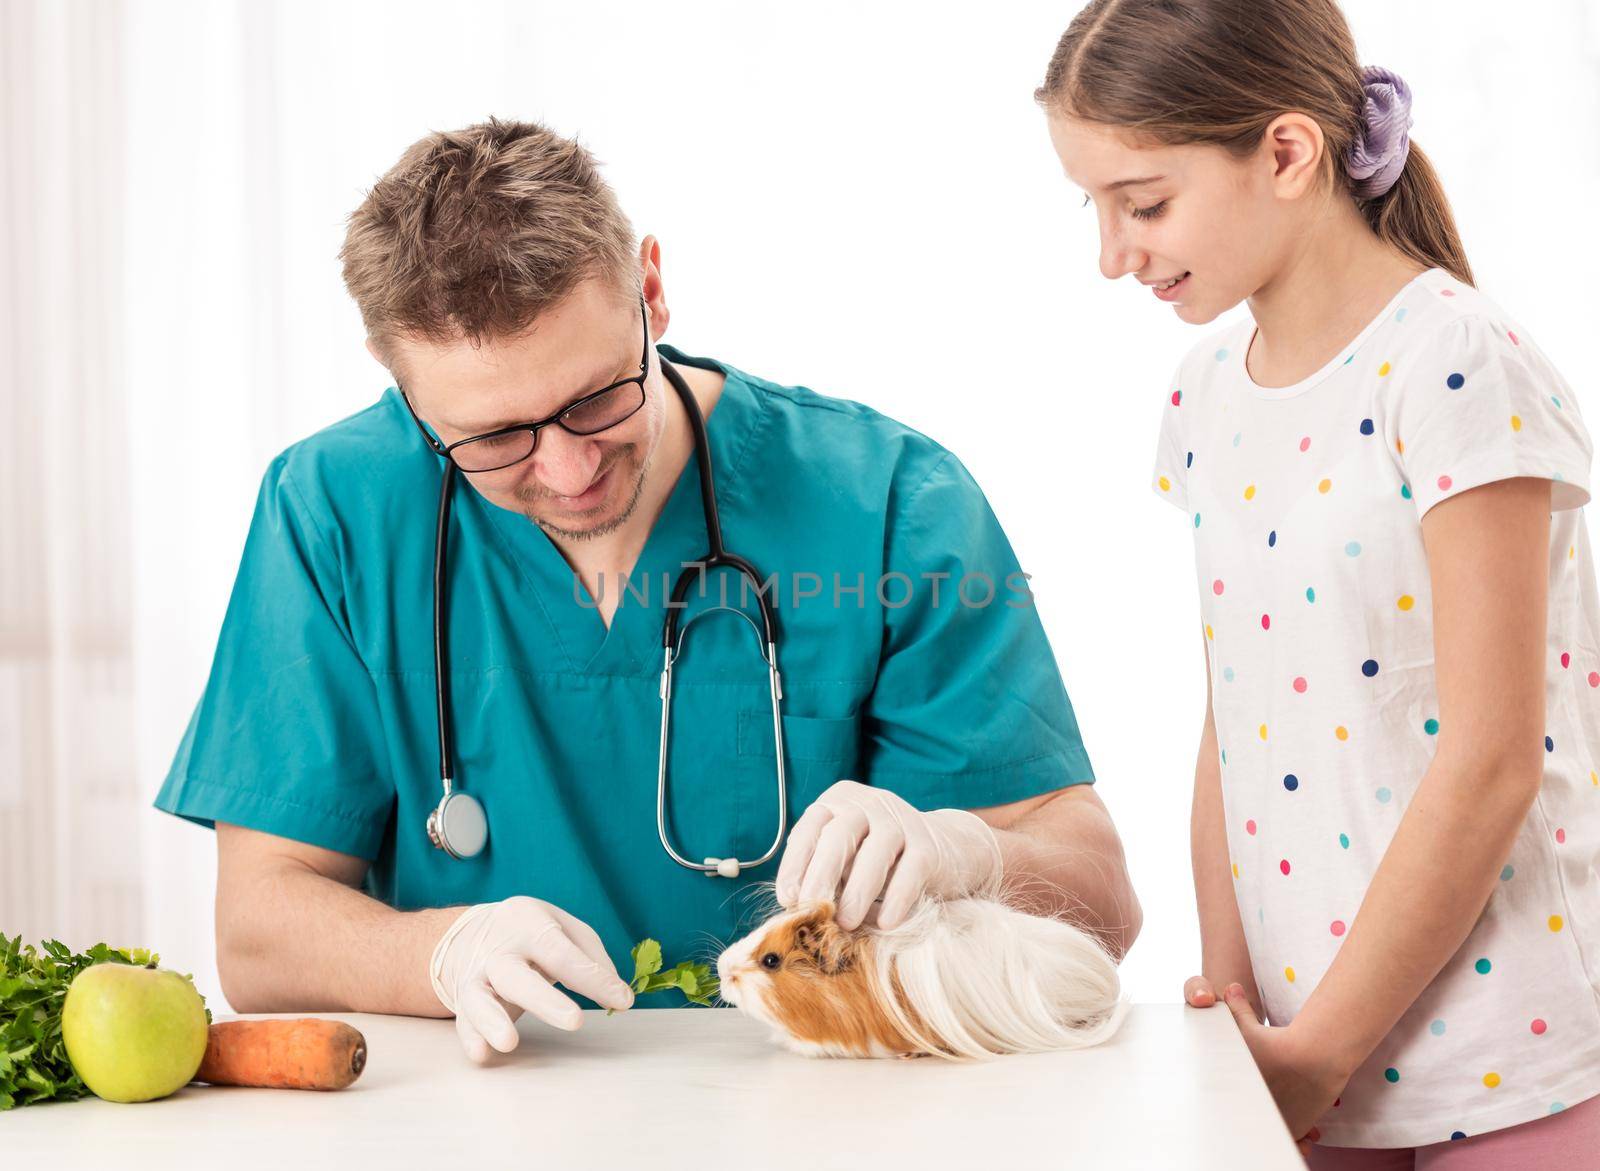 Smart veterinary showing the diet of peruwian guinea pig to teen girl, isolated on white background